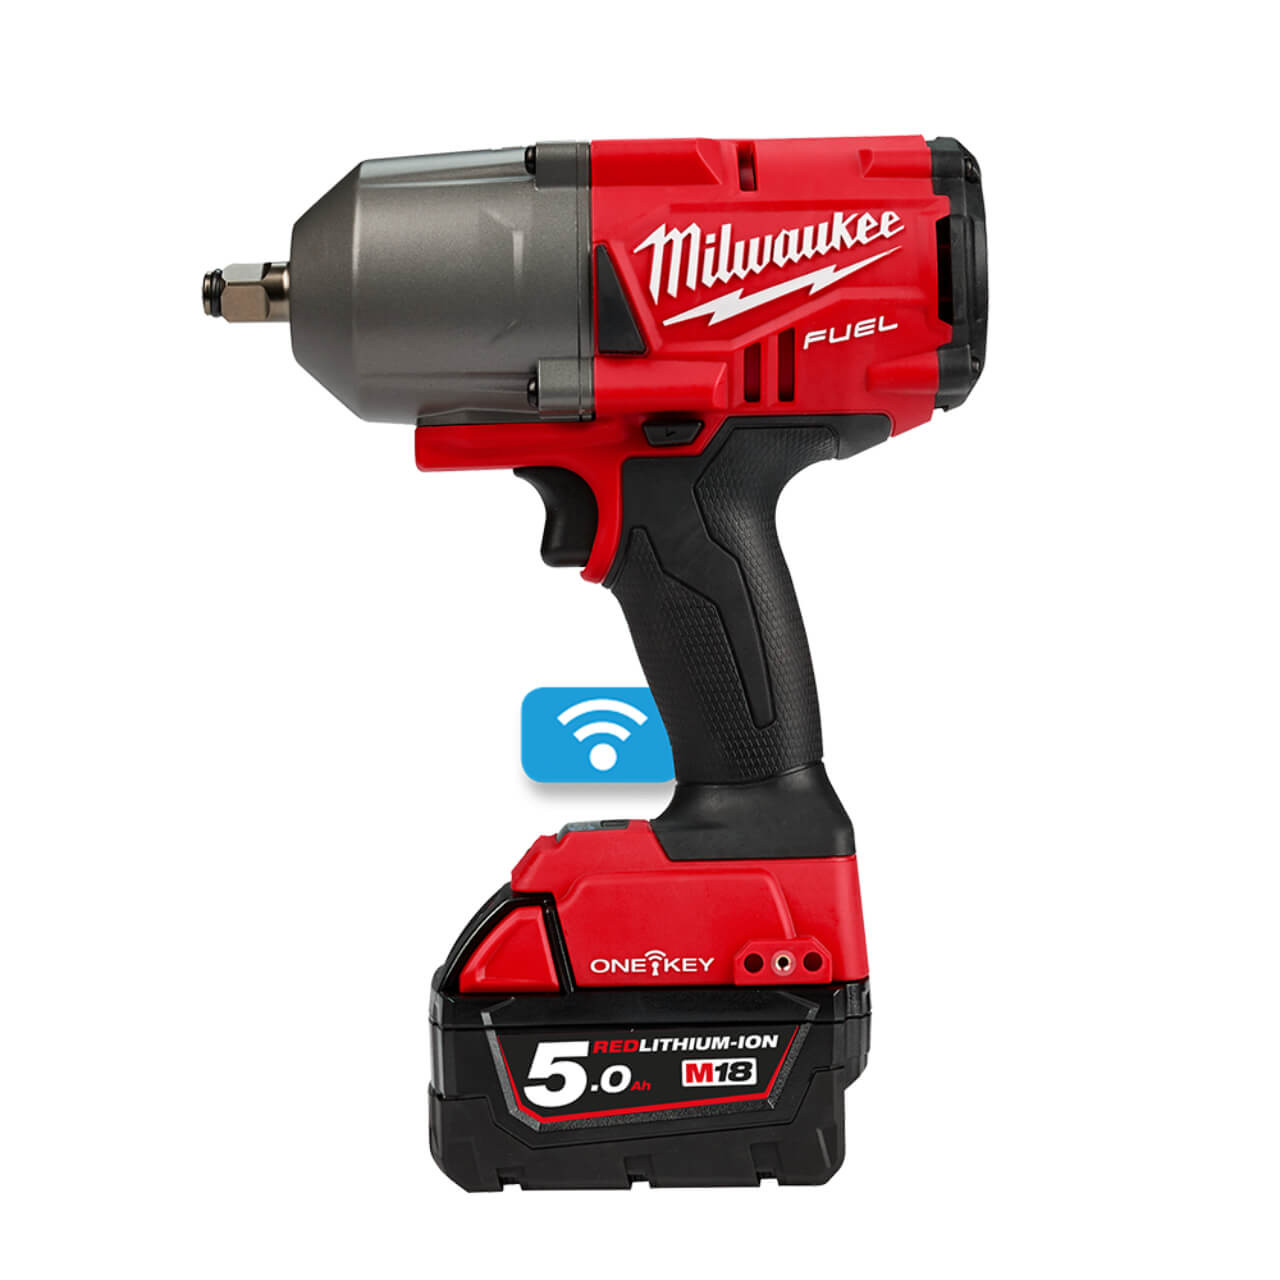 Milwaukee M18 Fuel One-Key Cordless 1/2 High Torque Impact Wrench With Friction Ring Skin Only